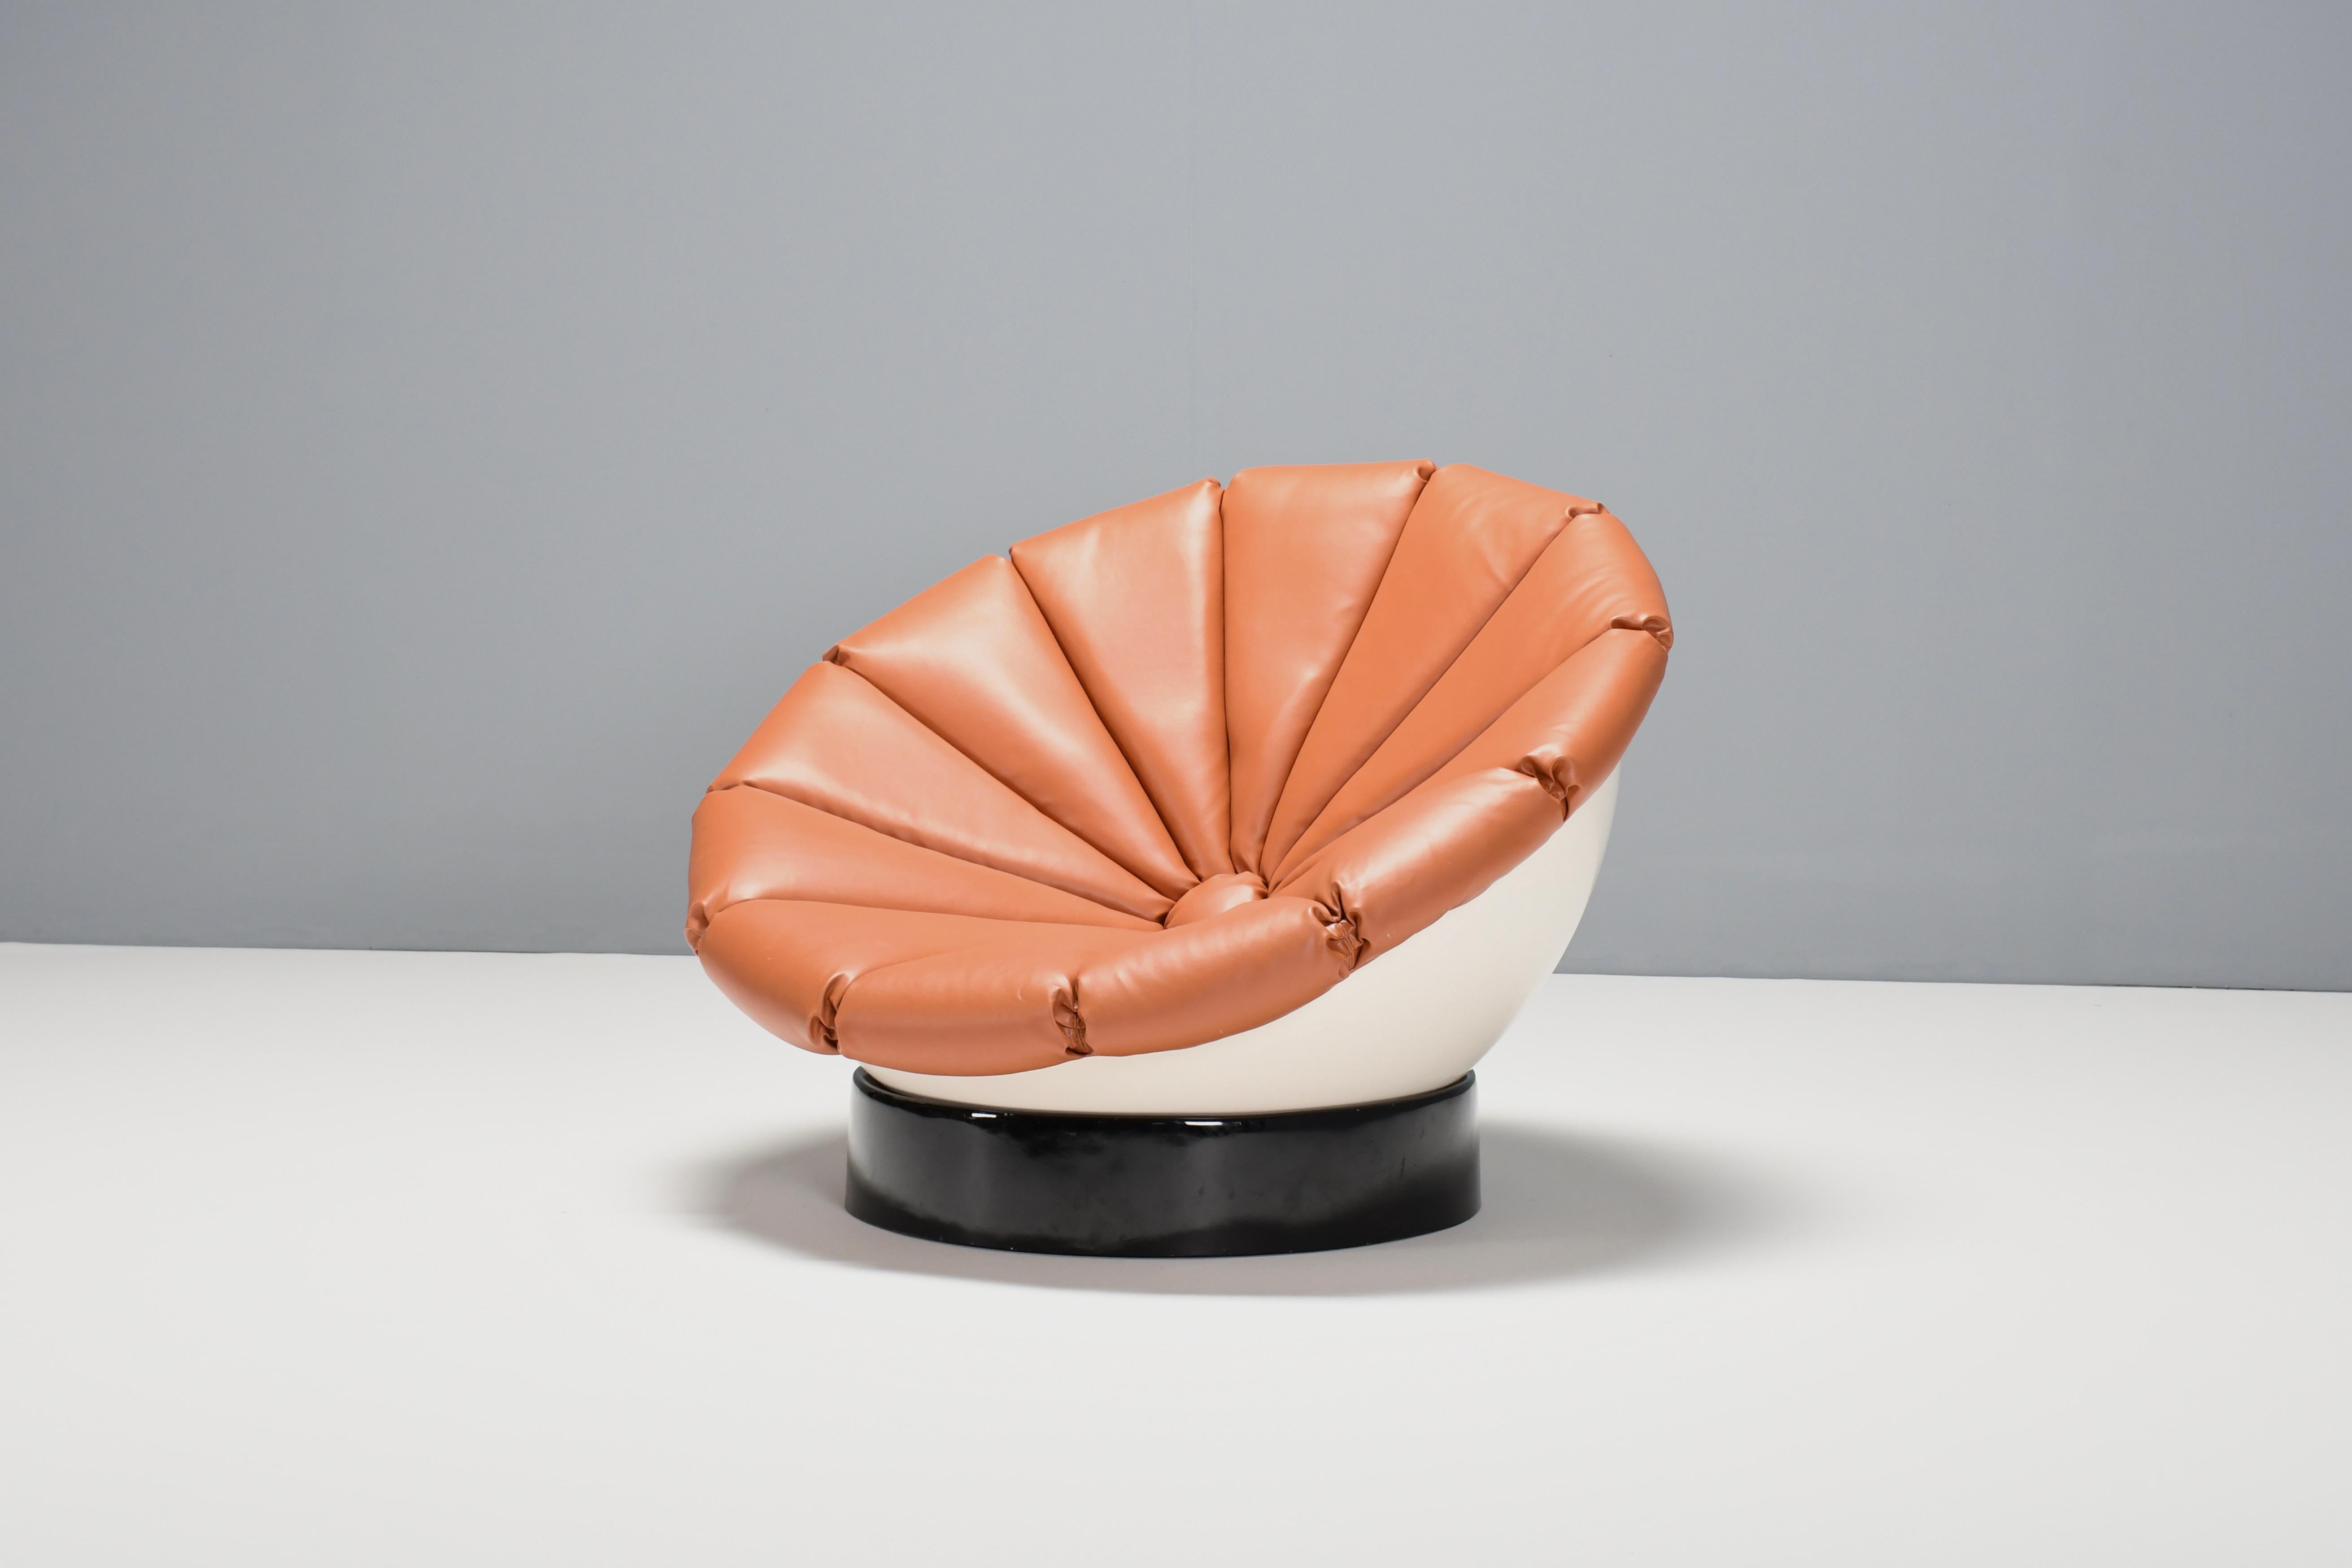 Space Age Impressive Fiberglass ‘Girasole’ Chair by Luciano Frigerio, Italy, 1960s For Sale